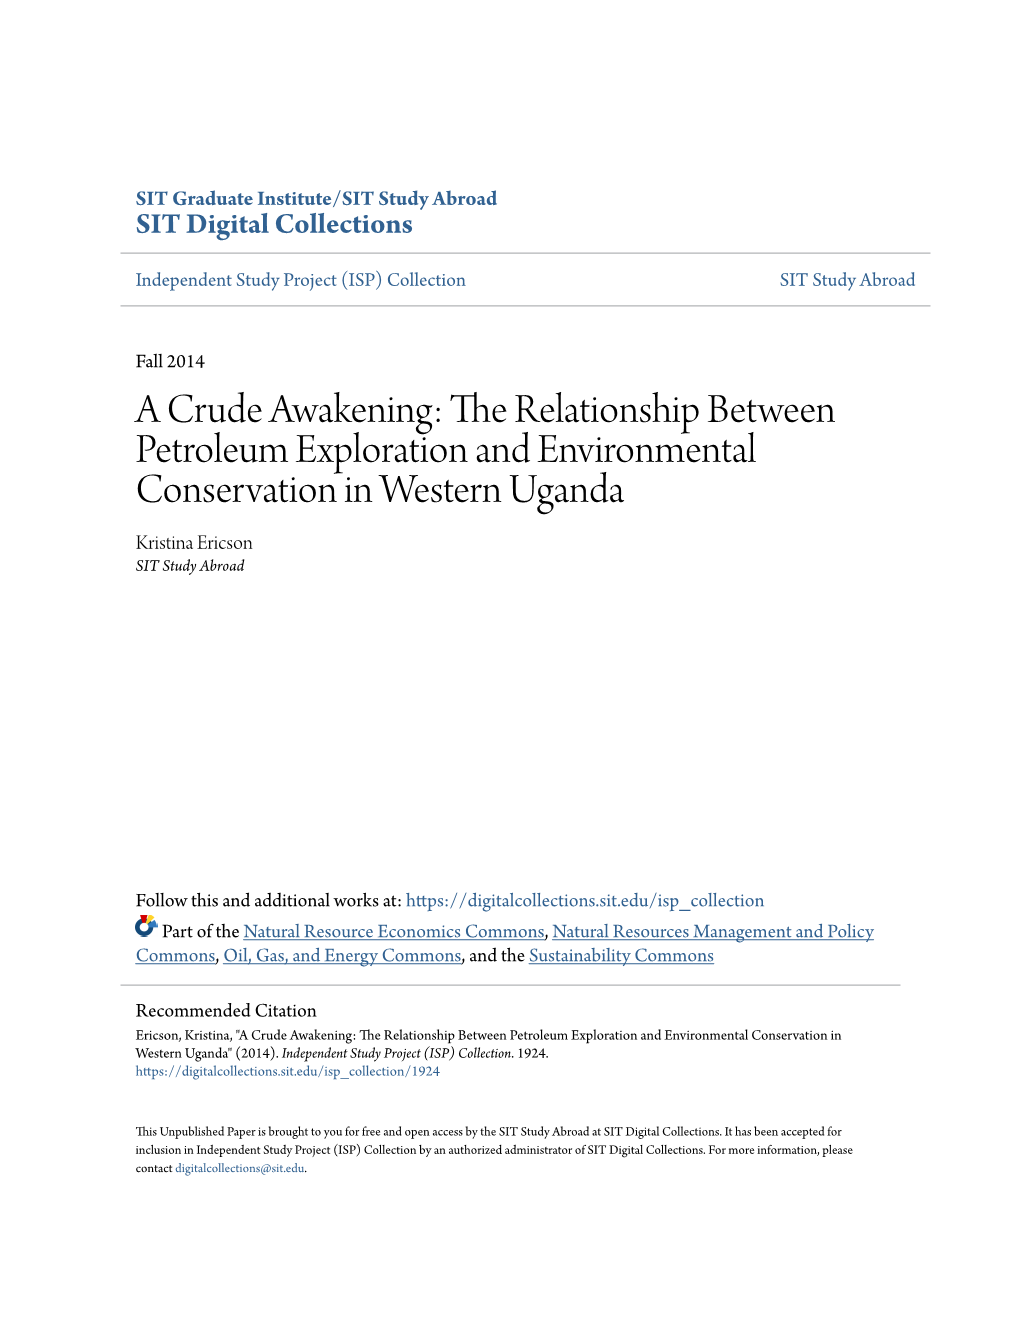 The Relationship Between Petroleum Exploration and Environmental Conservation in Western Uganda Kristina Ericson SIT Study Abroad